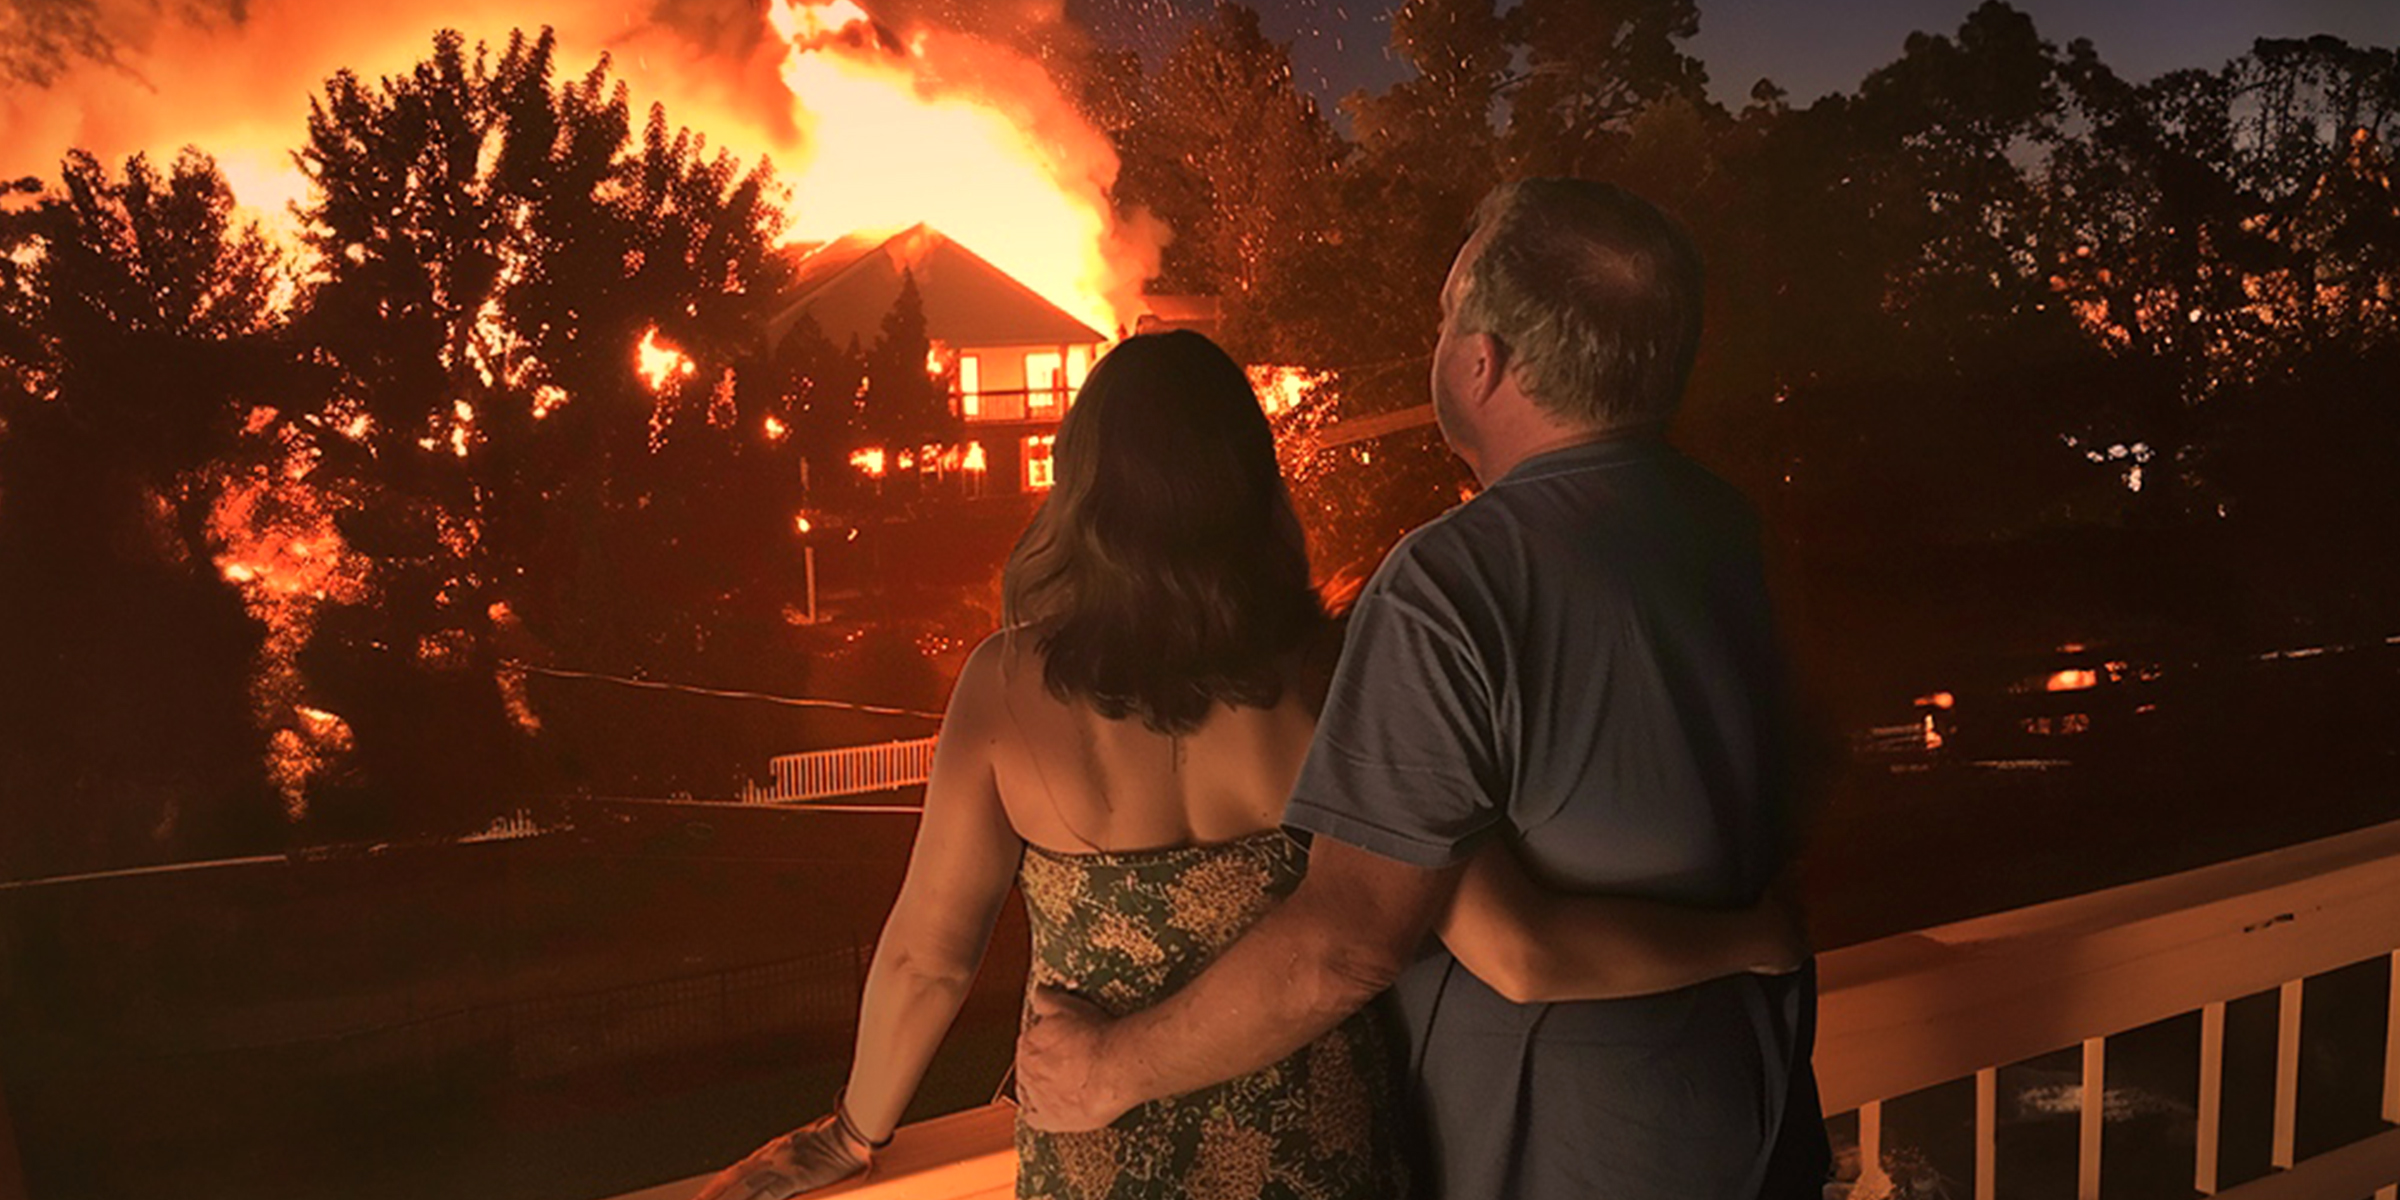 A couple watching a house on fire in their neighborhood | Source: Midjourney